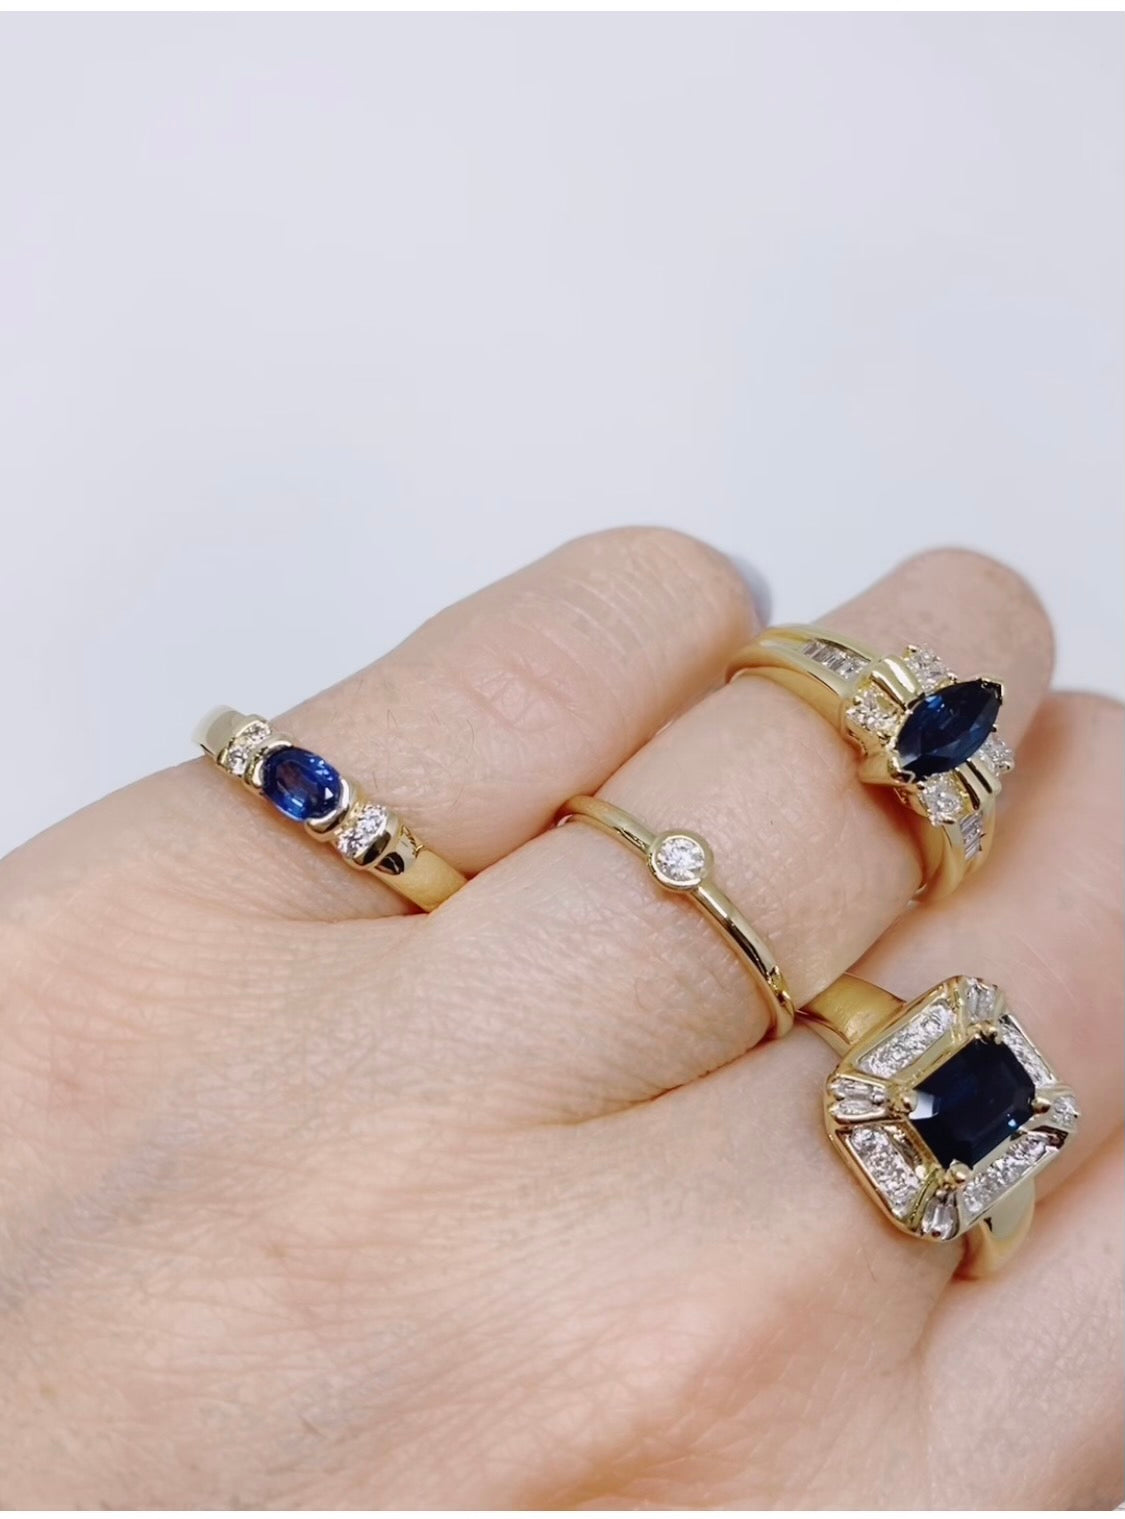 Vintage 18kt Yellow Gold Marquise Sapphire and Diamond Ring on model